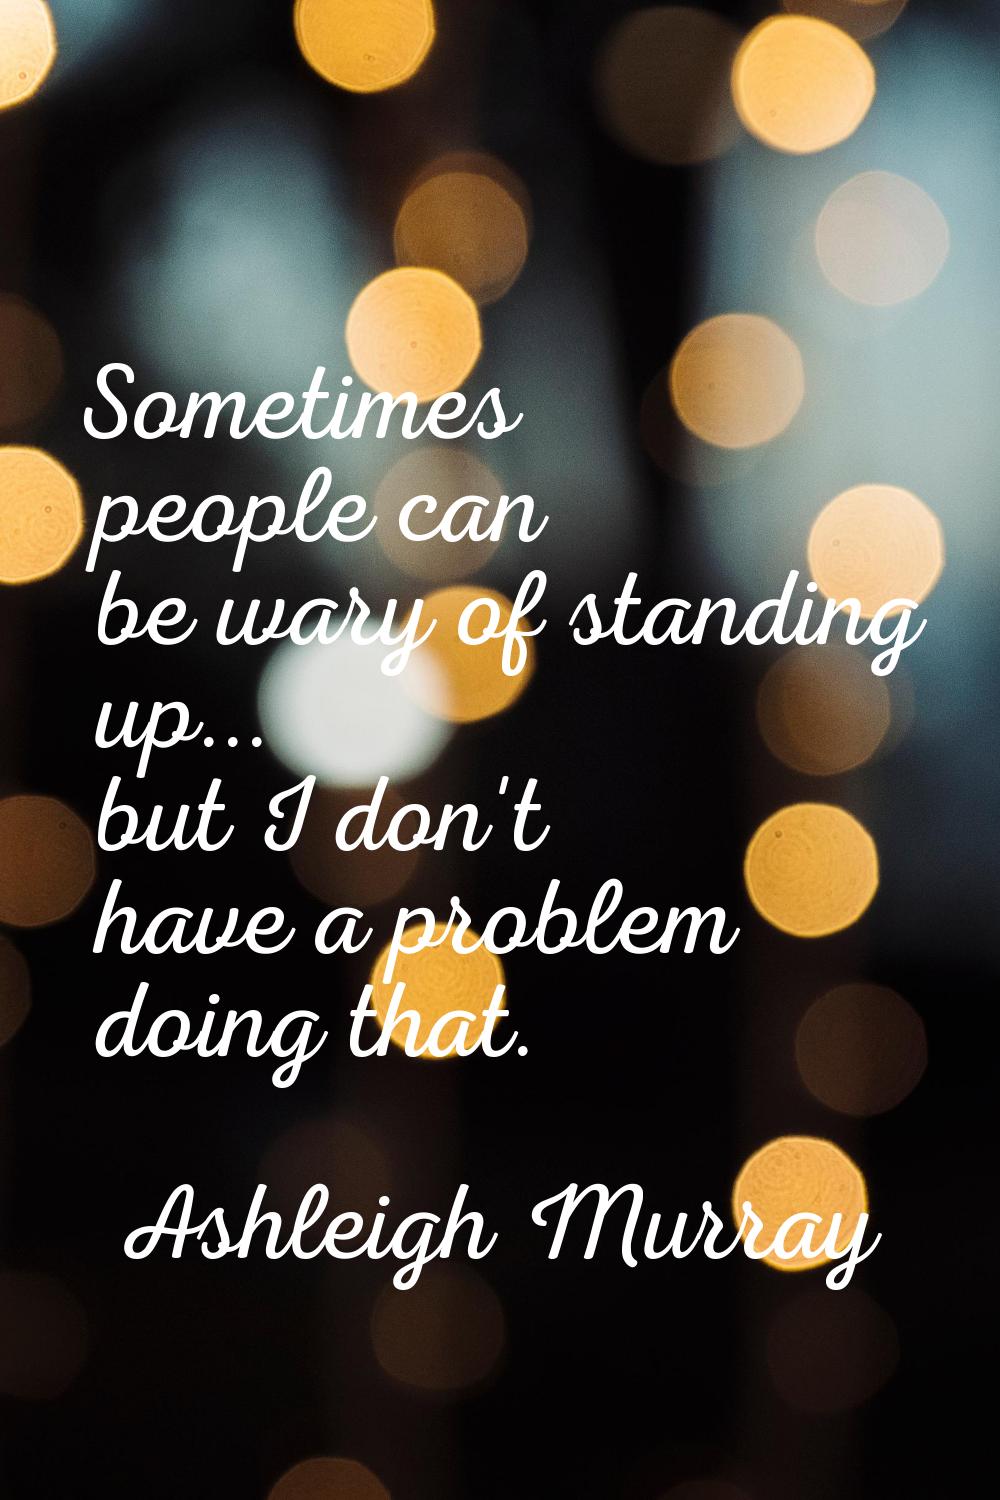 Sometimes people can be wary of standing up... but I don't have a problem doing that.